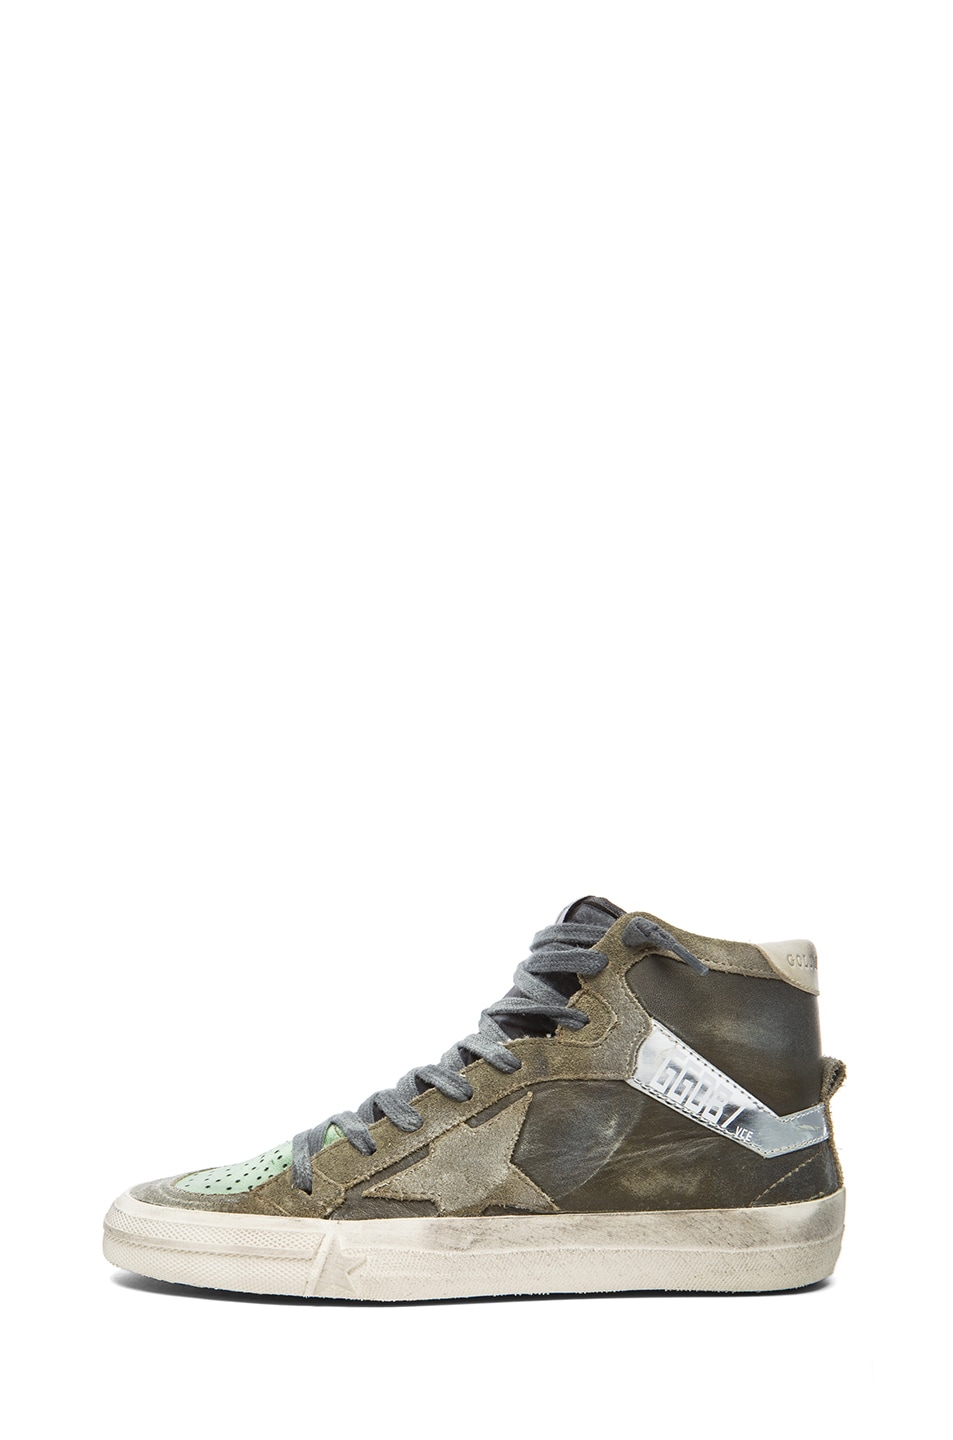 Image 1 of Golden Goose 2.12 Suede & Leather Sneakers in Military